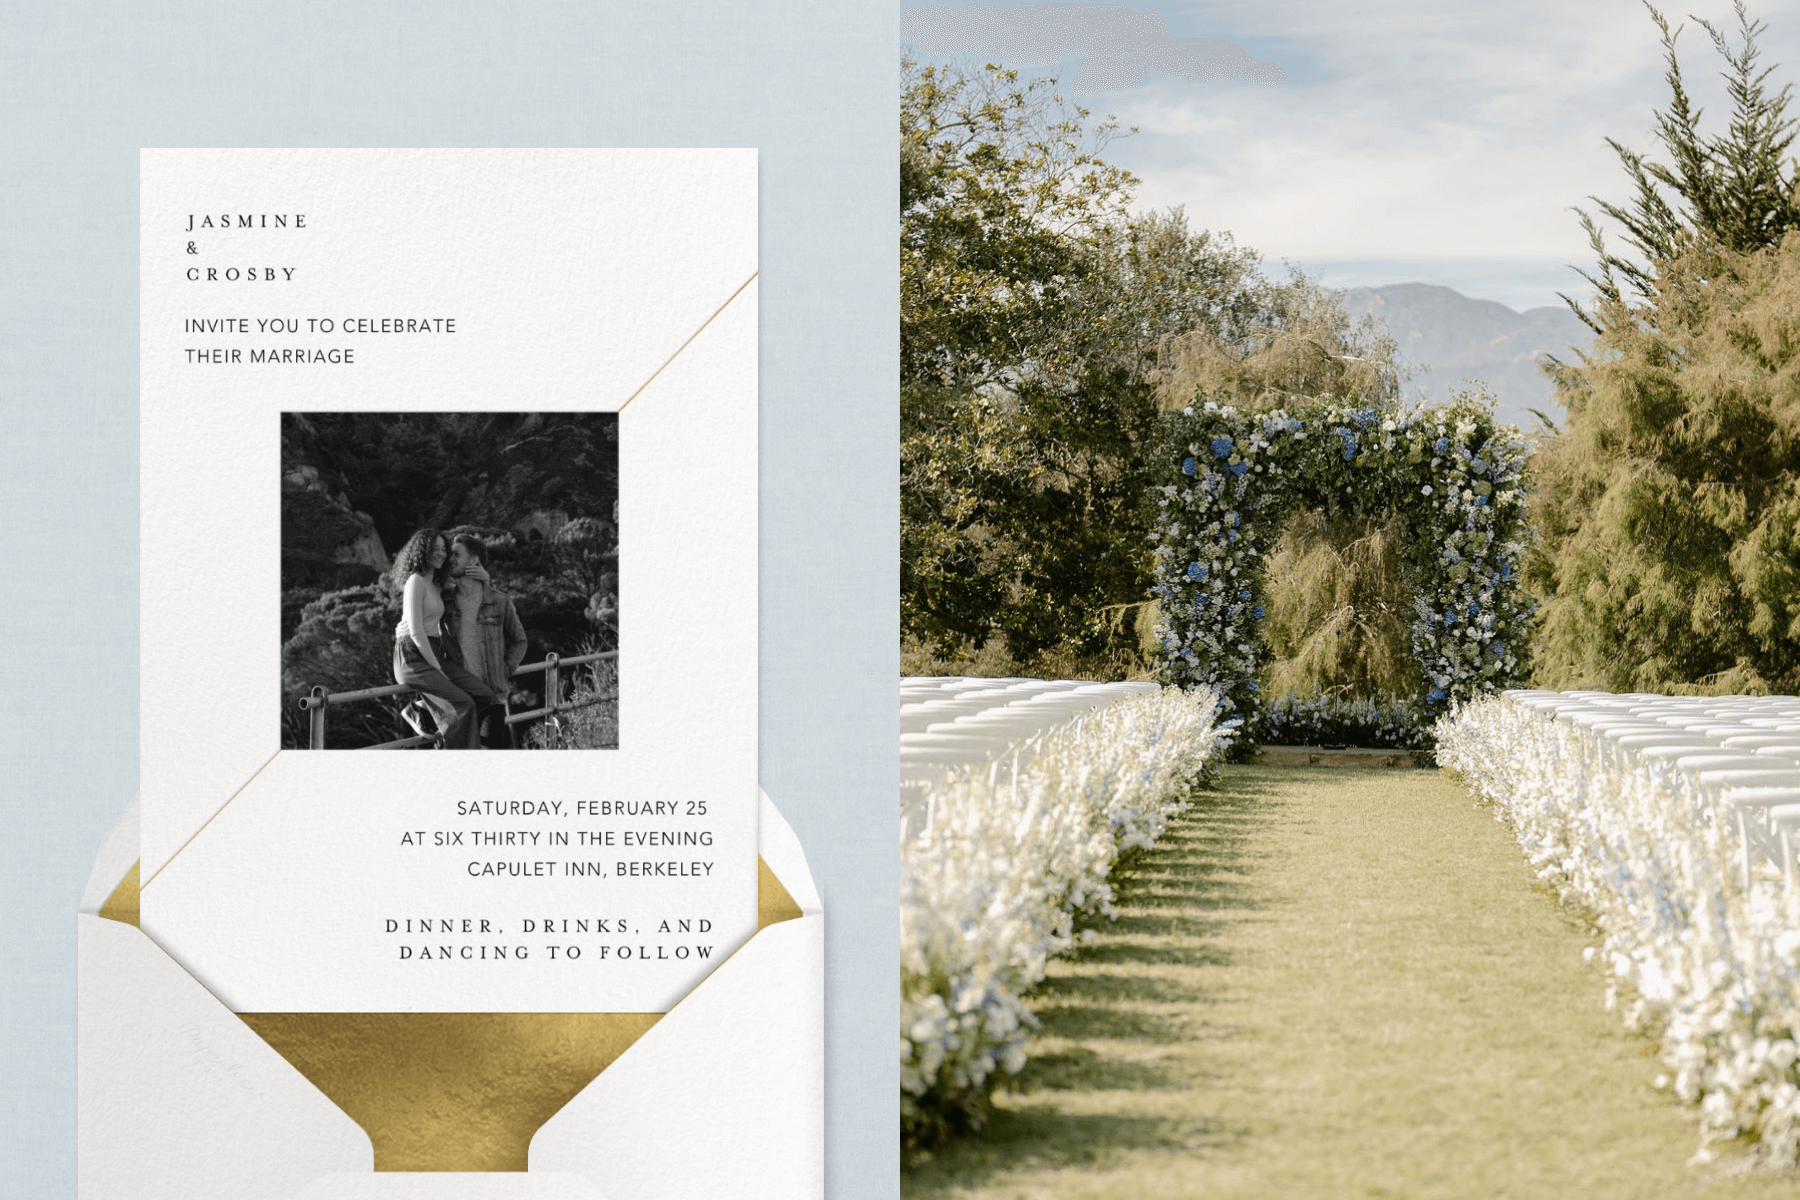 Left: Modern wedding invitation with white background, black and white photo of a couple and a gold line cutting across the card diagonally, with a white envelope and gold liner. Right: Grassy outdoor wedding aisle with floral arch at the end and white chairs lining the aisle. 